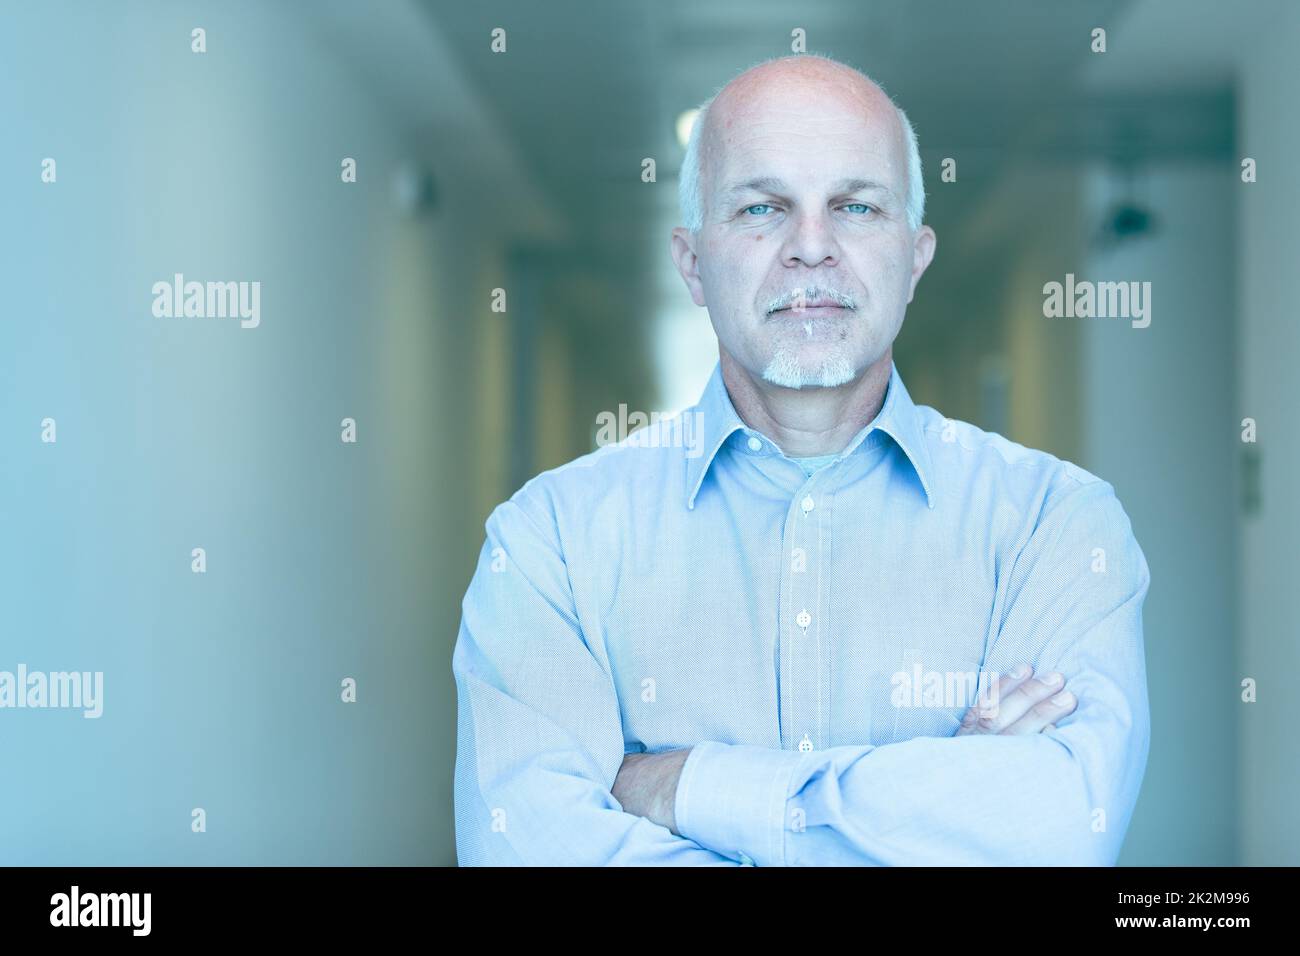 Inscrutable businessman staring at camera with deadpan look Stock Photo